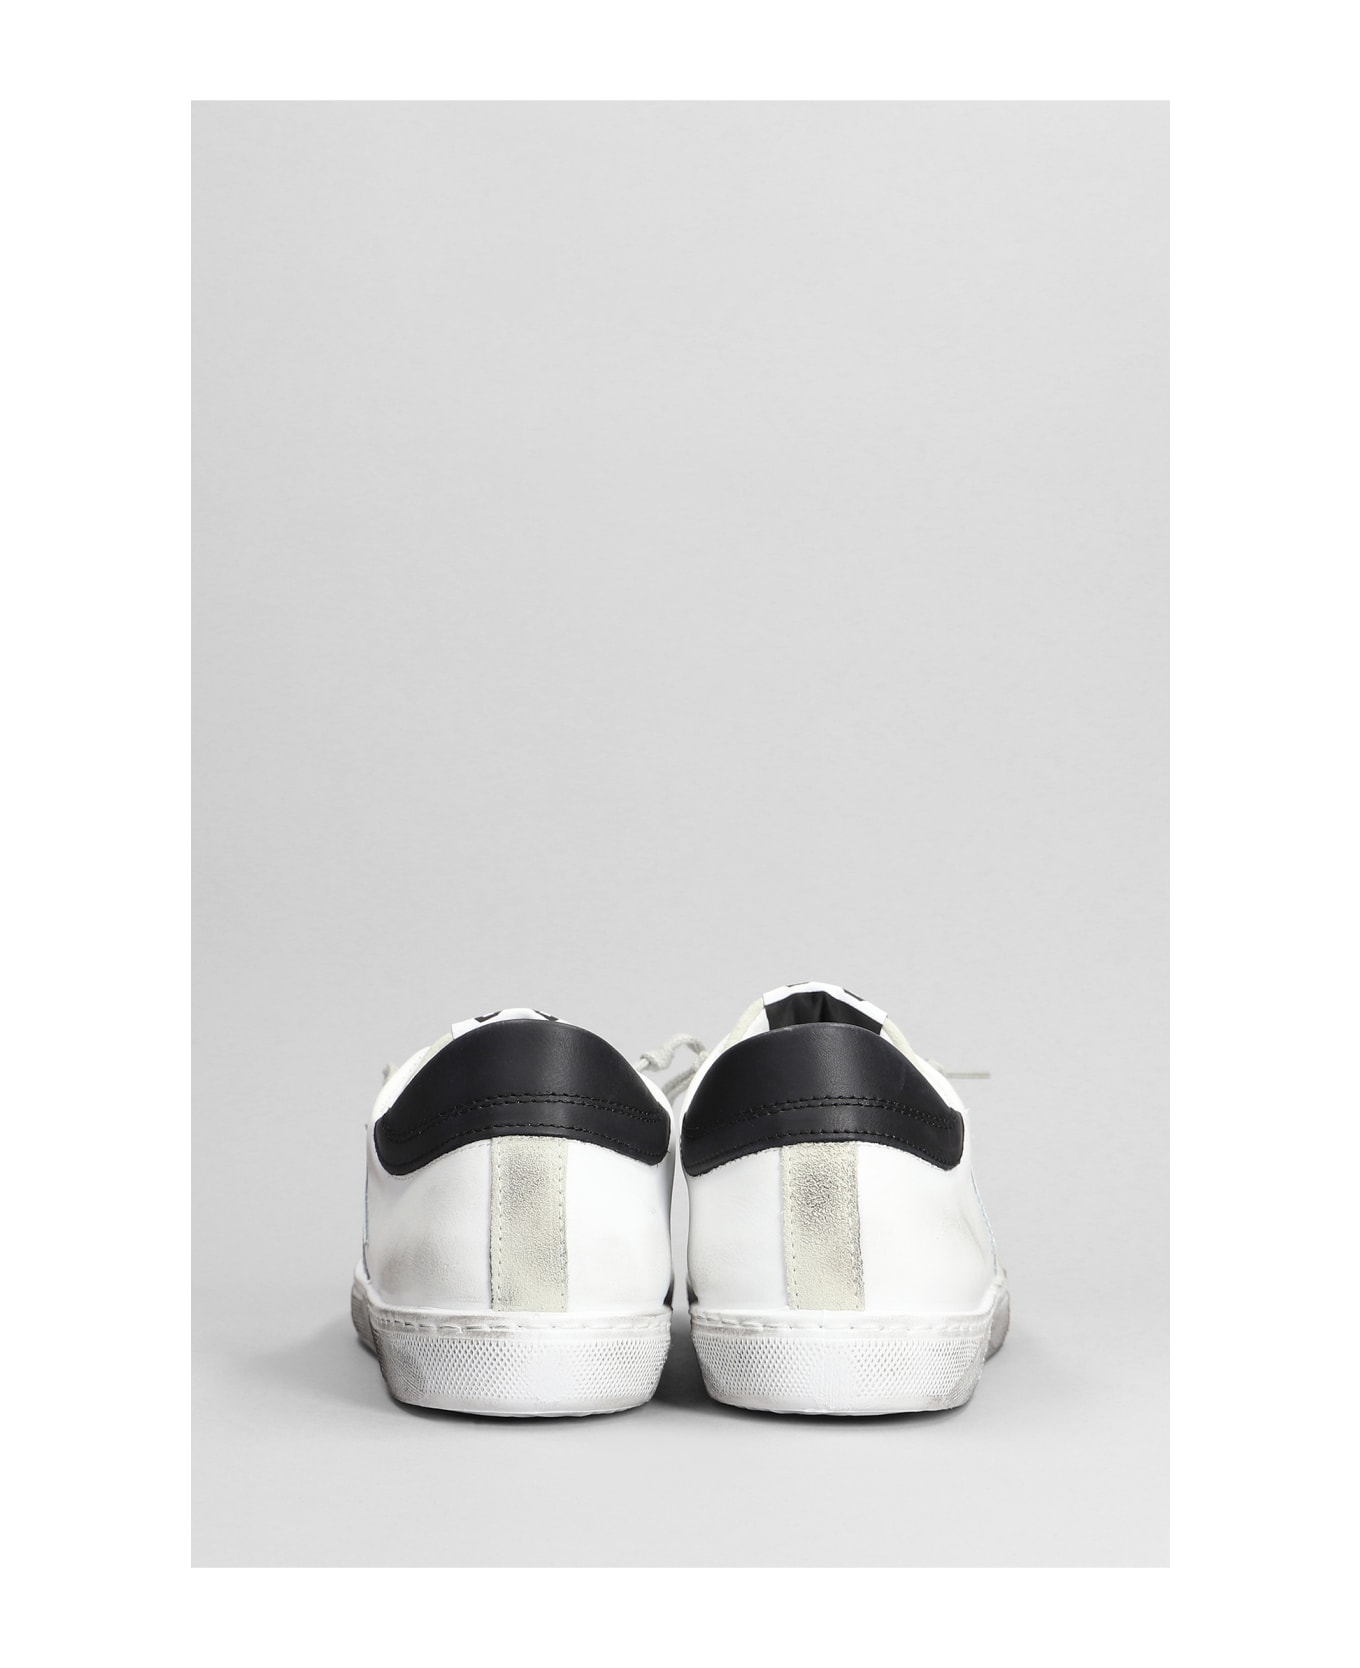 2Star Sneakers In White Suede And Leather - white